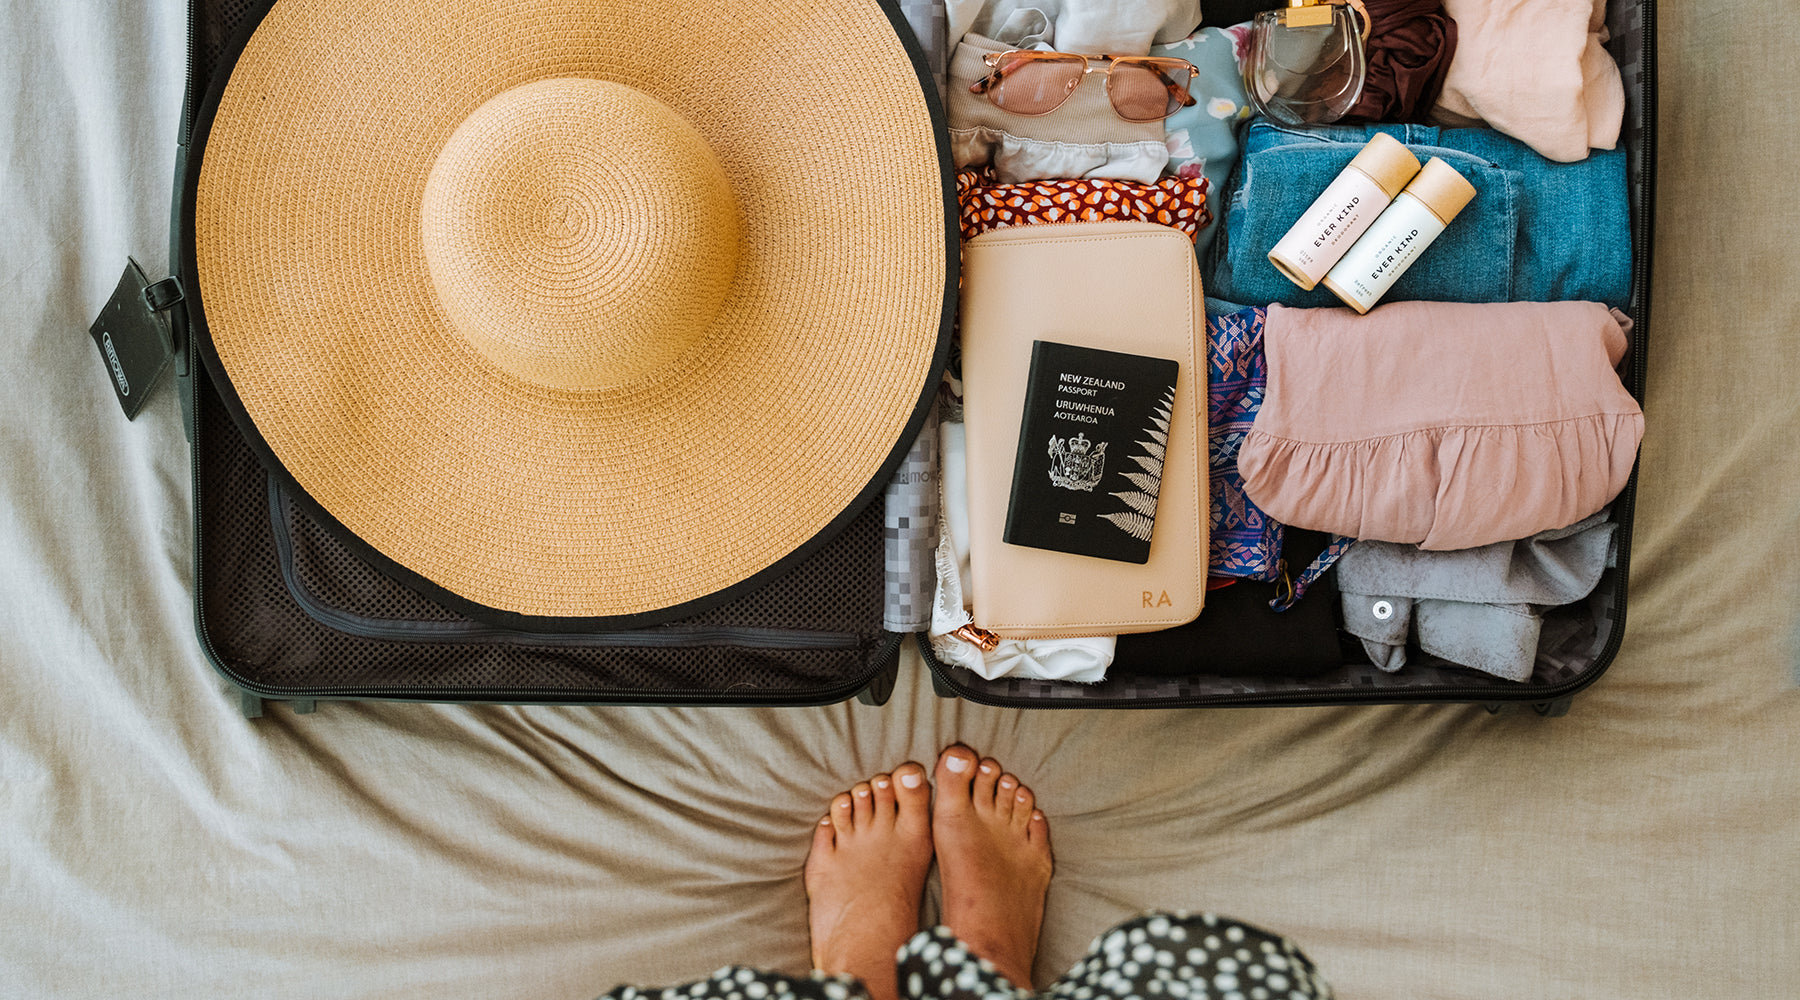 Suitcase packed with summer essentials, including Everkind deodorants.